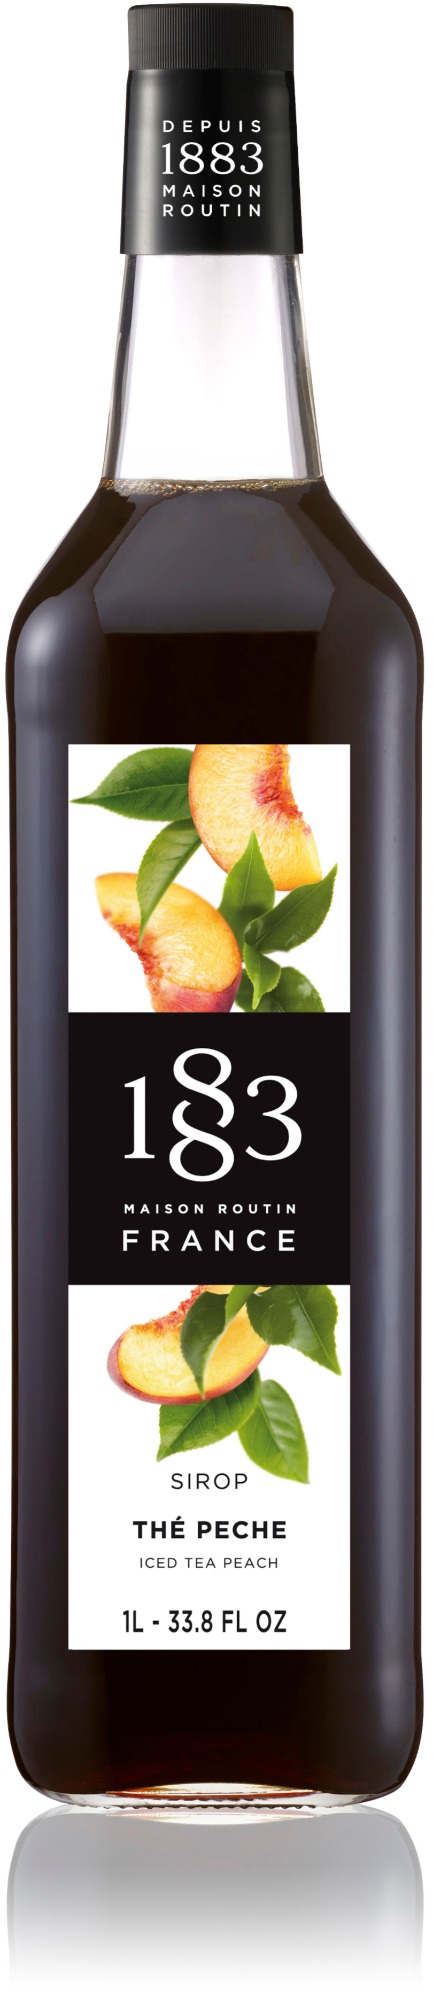 Maison routin syrup ingredients